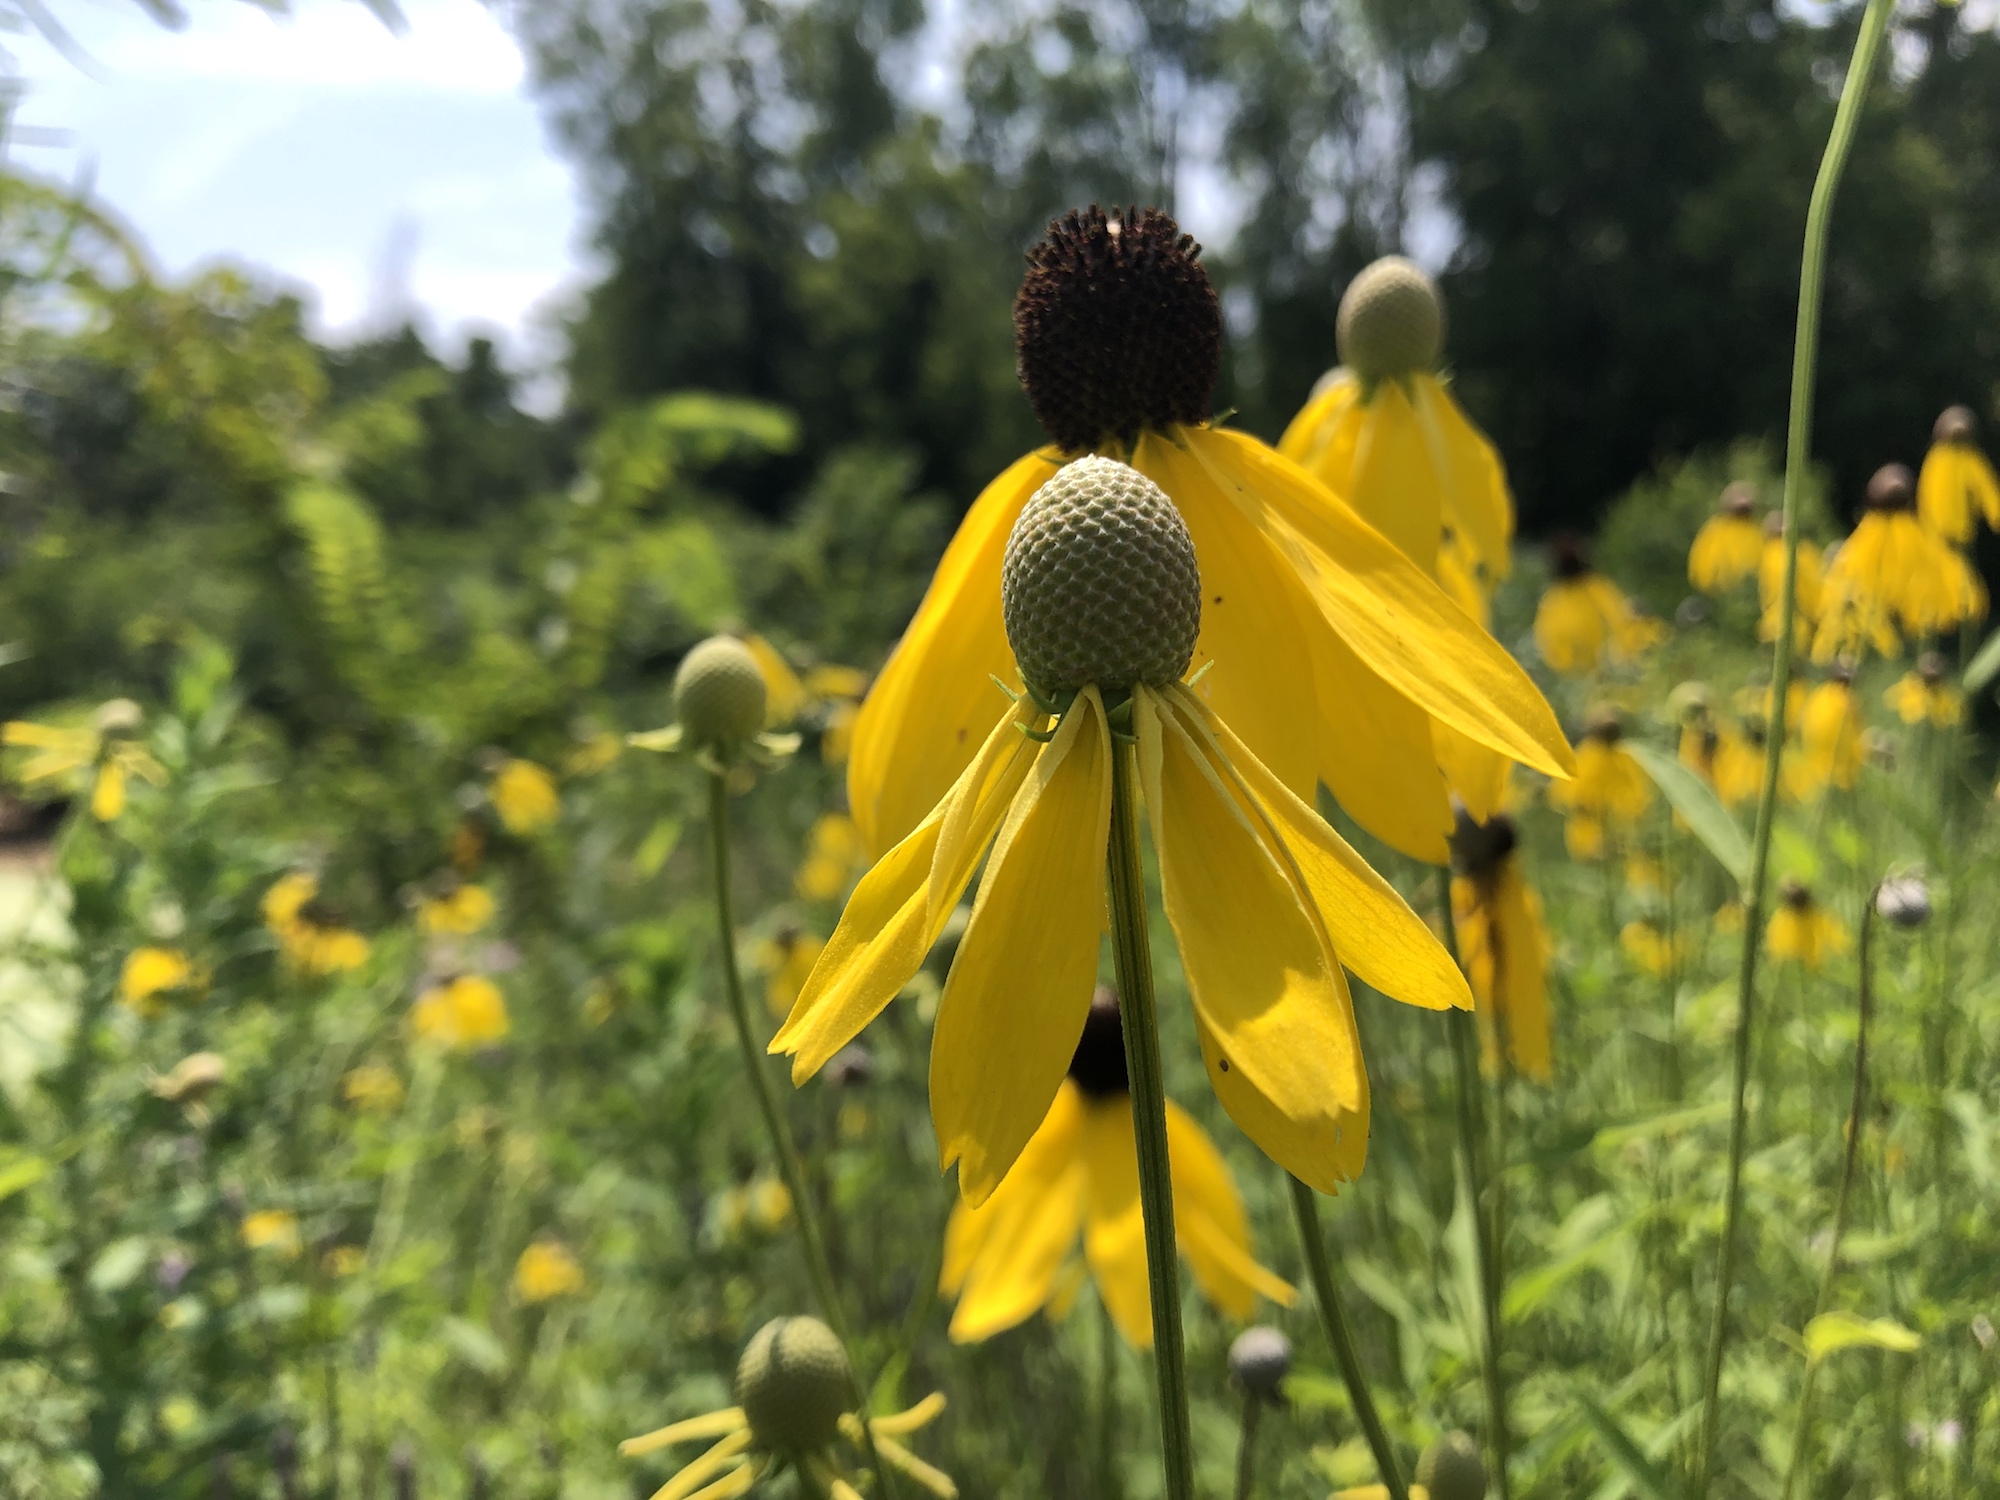 Gray-headed coneflower on shore of Marion Dunn Pond  in Madison, Wisconsin on July 25, 2019.